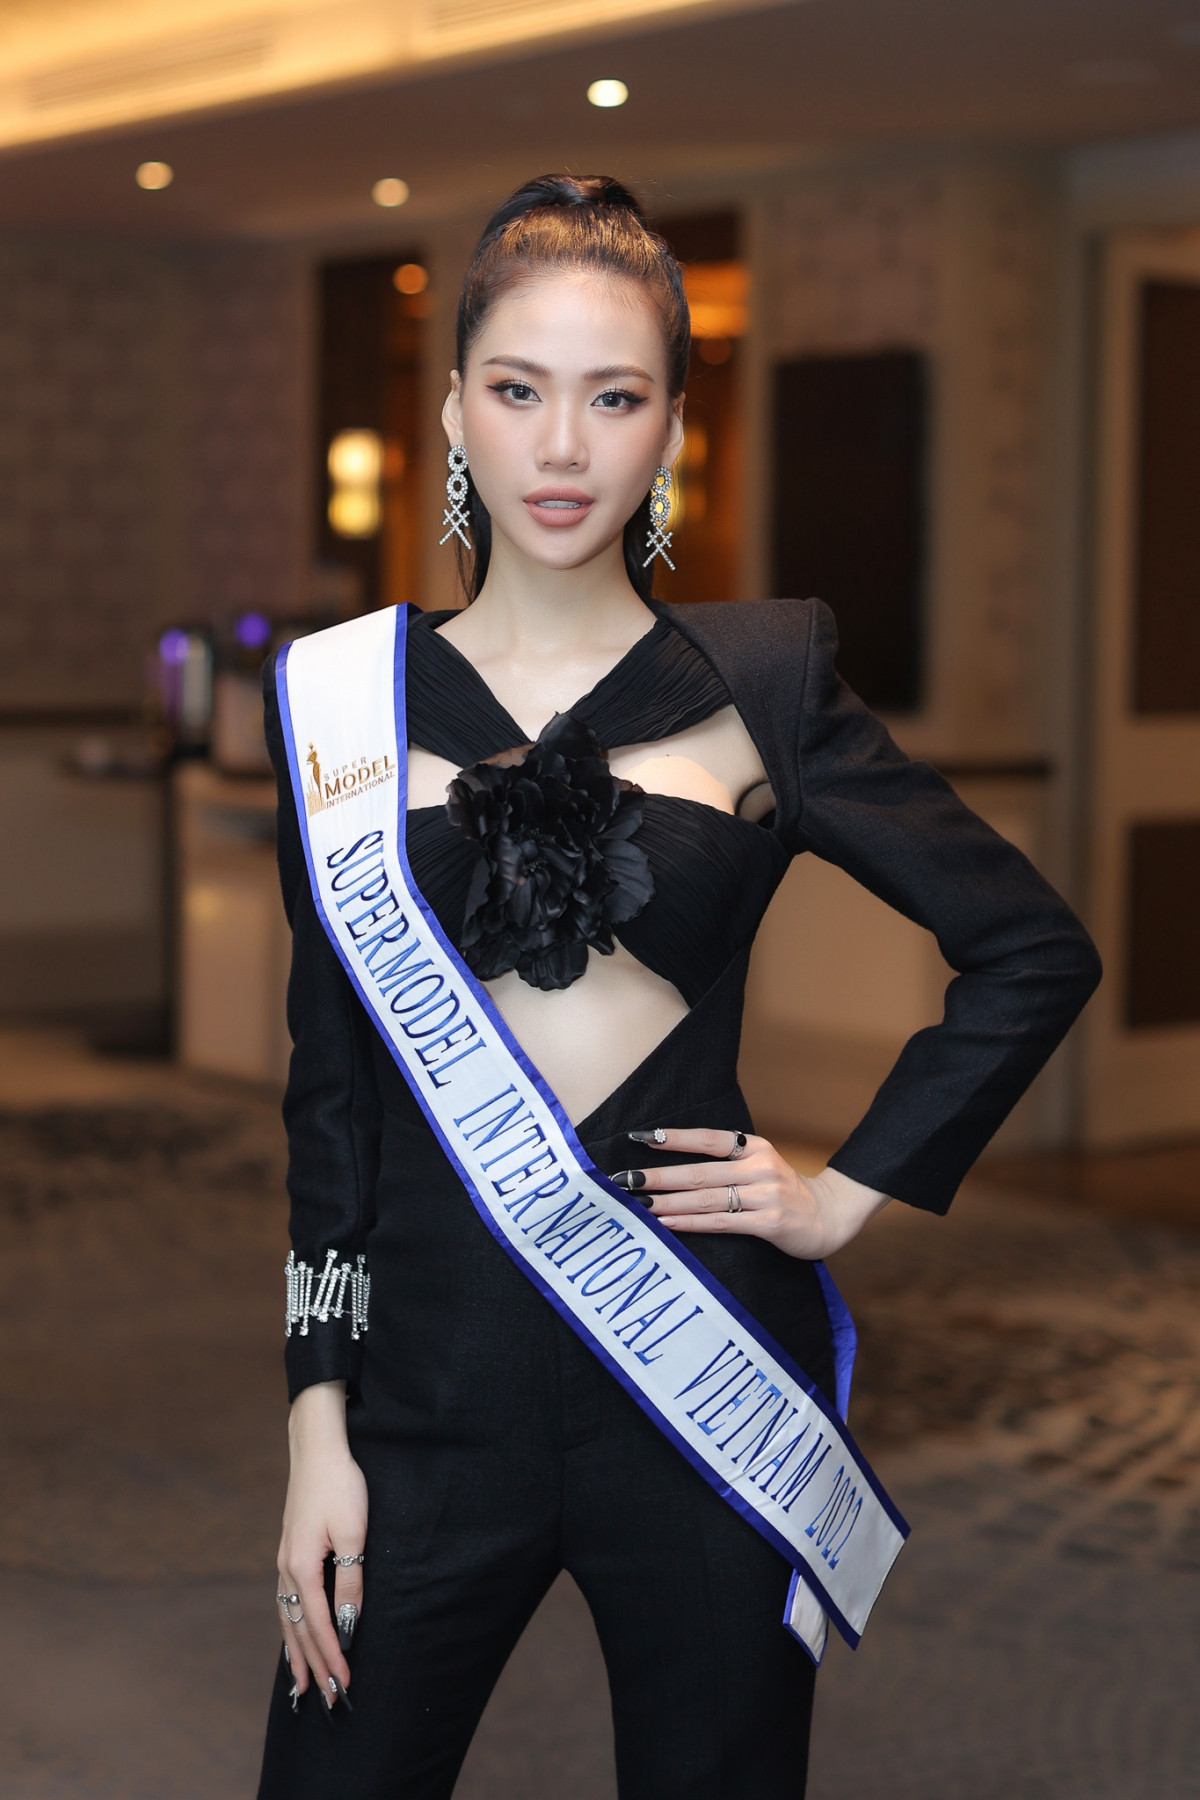 quynh hoa set to compete at supermodel international 2022 picture 1